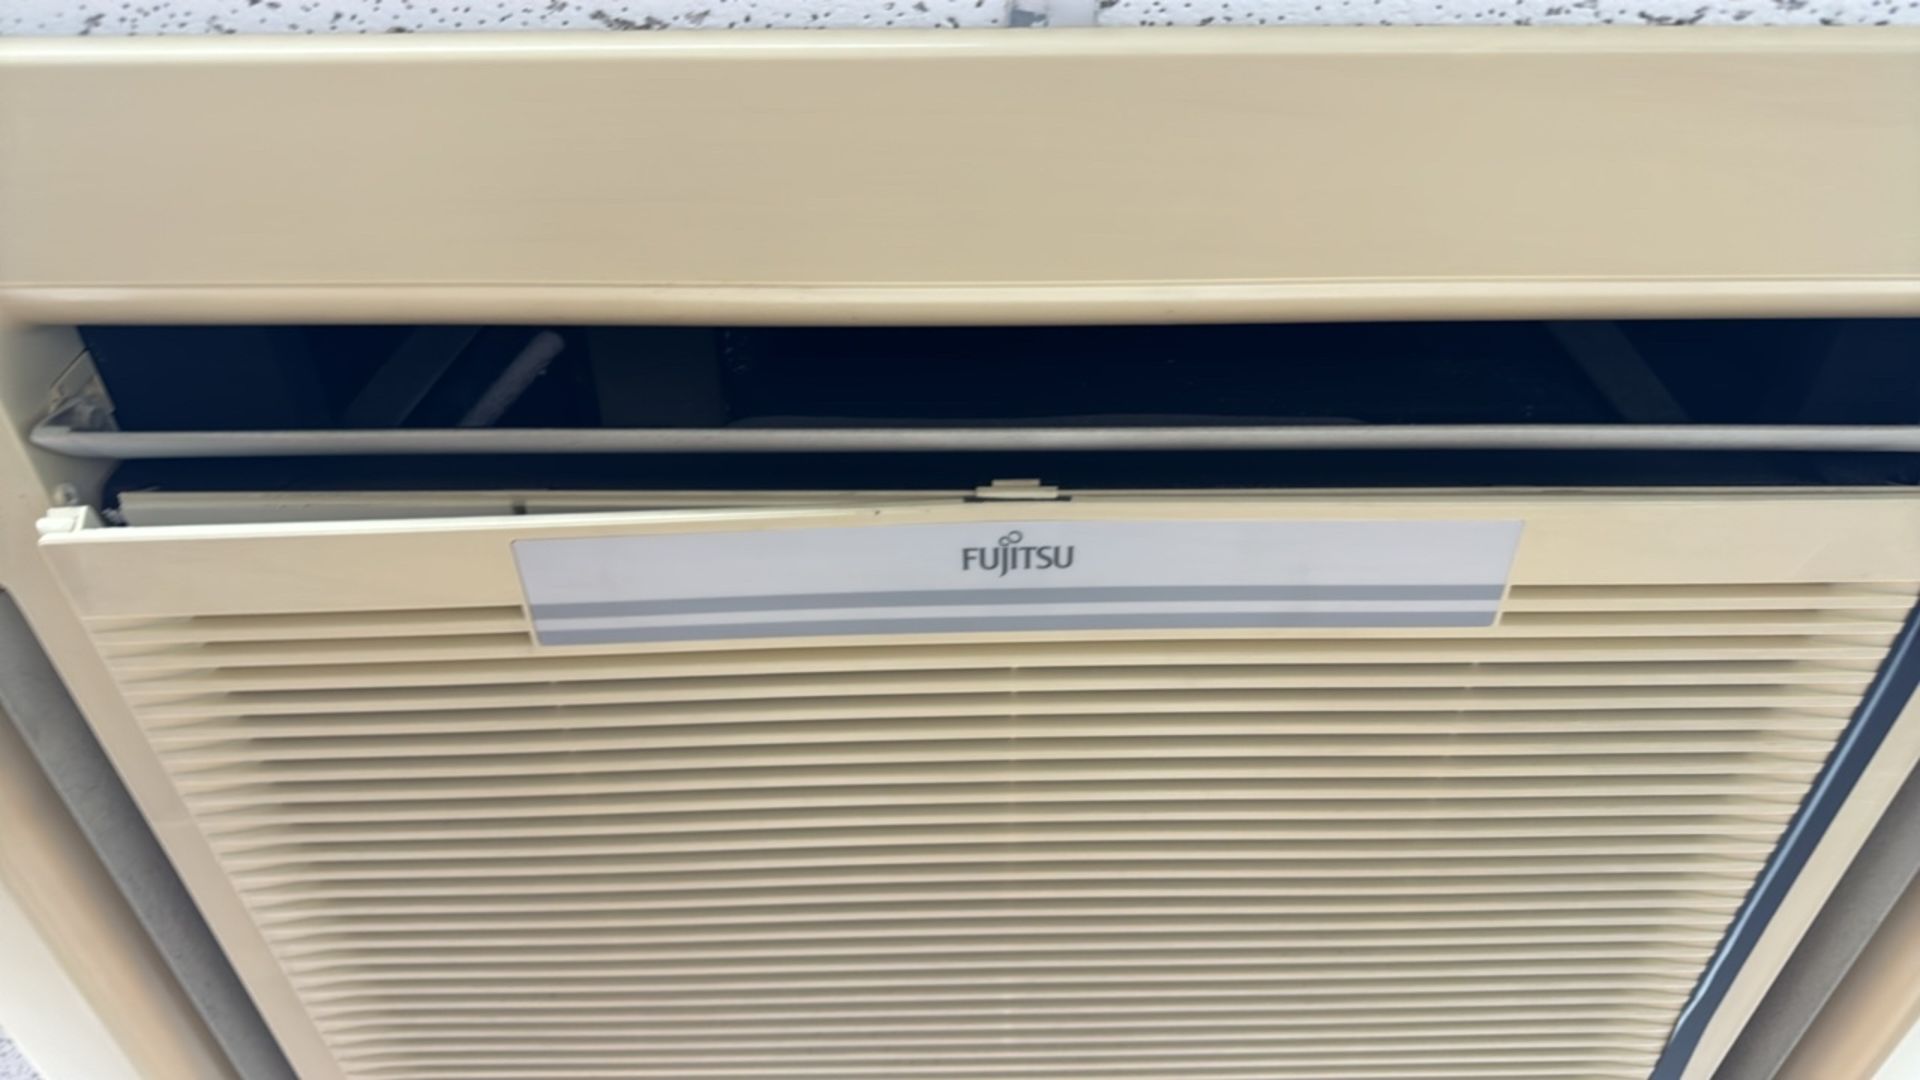 Fujitsu Air Conditioning Ceiling Cassette - Image 4 of 5